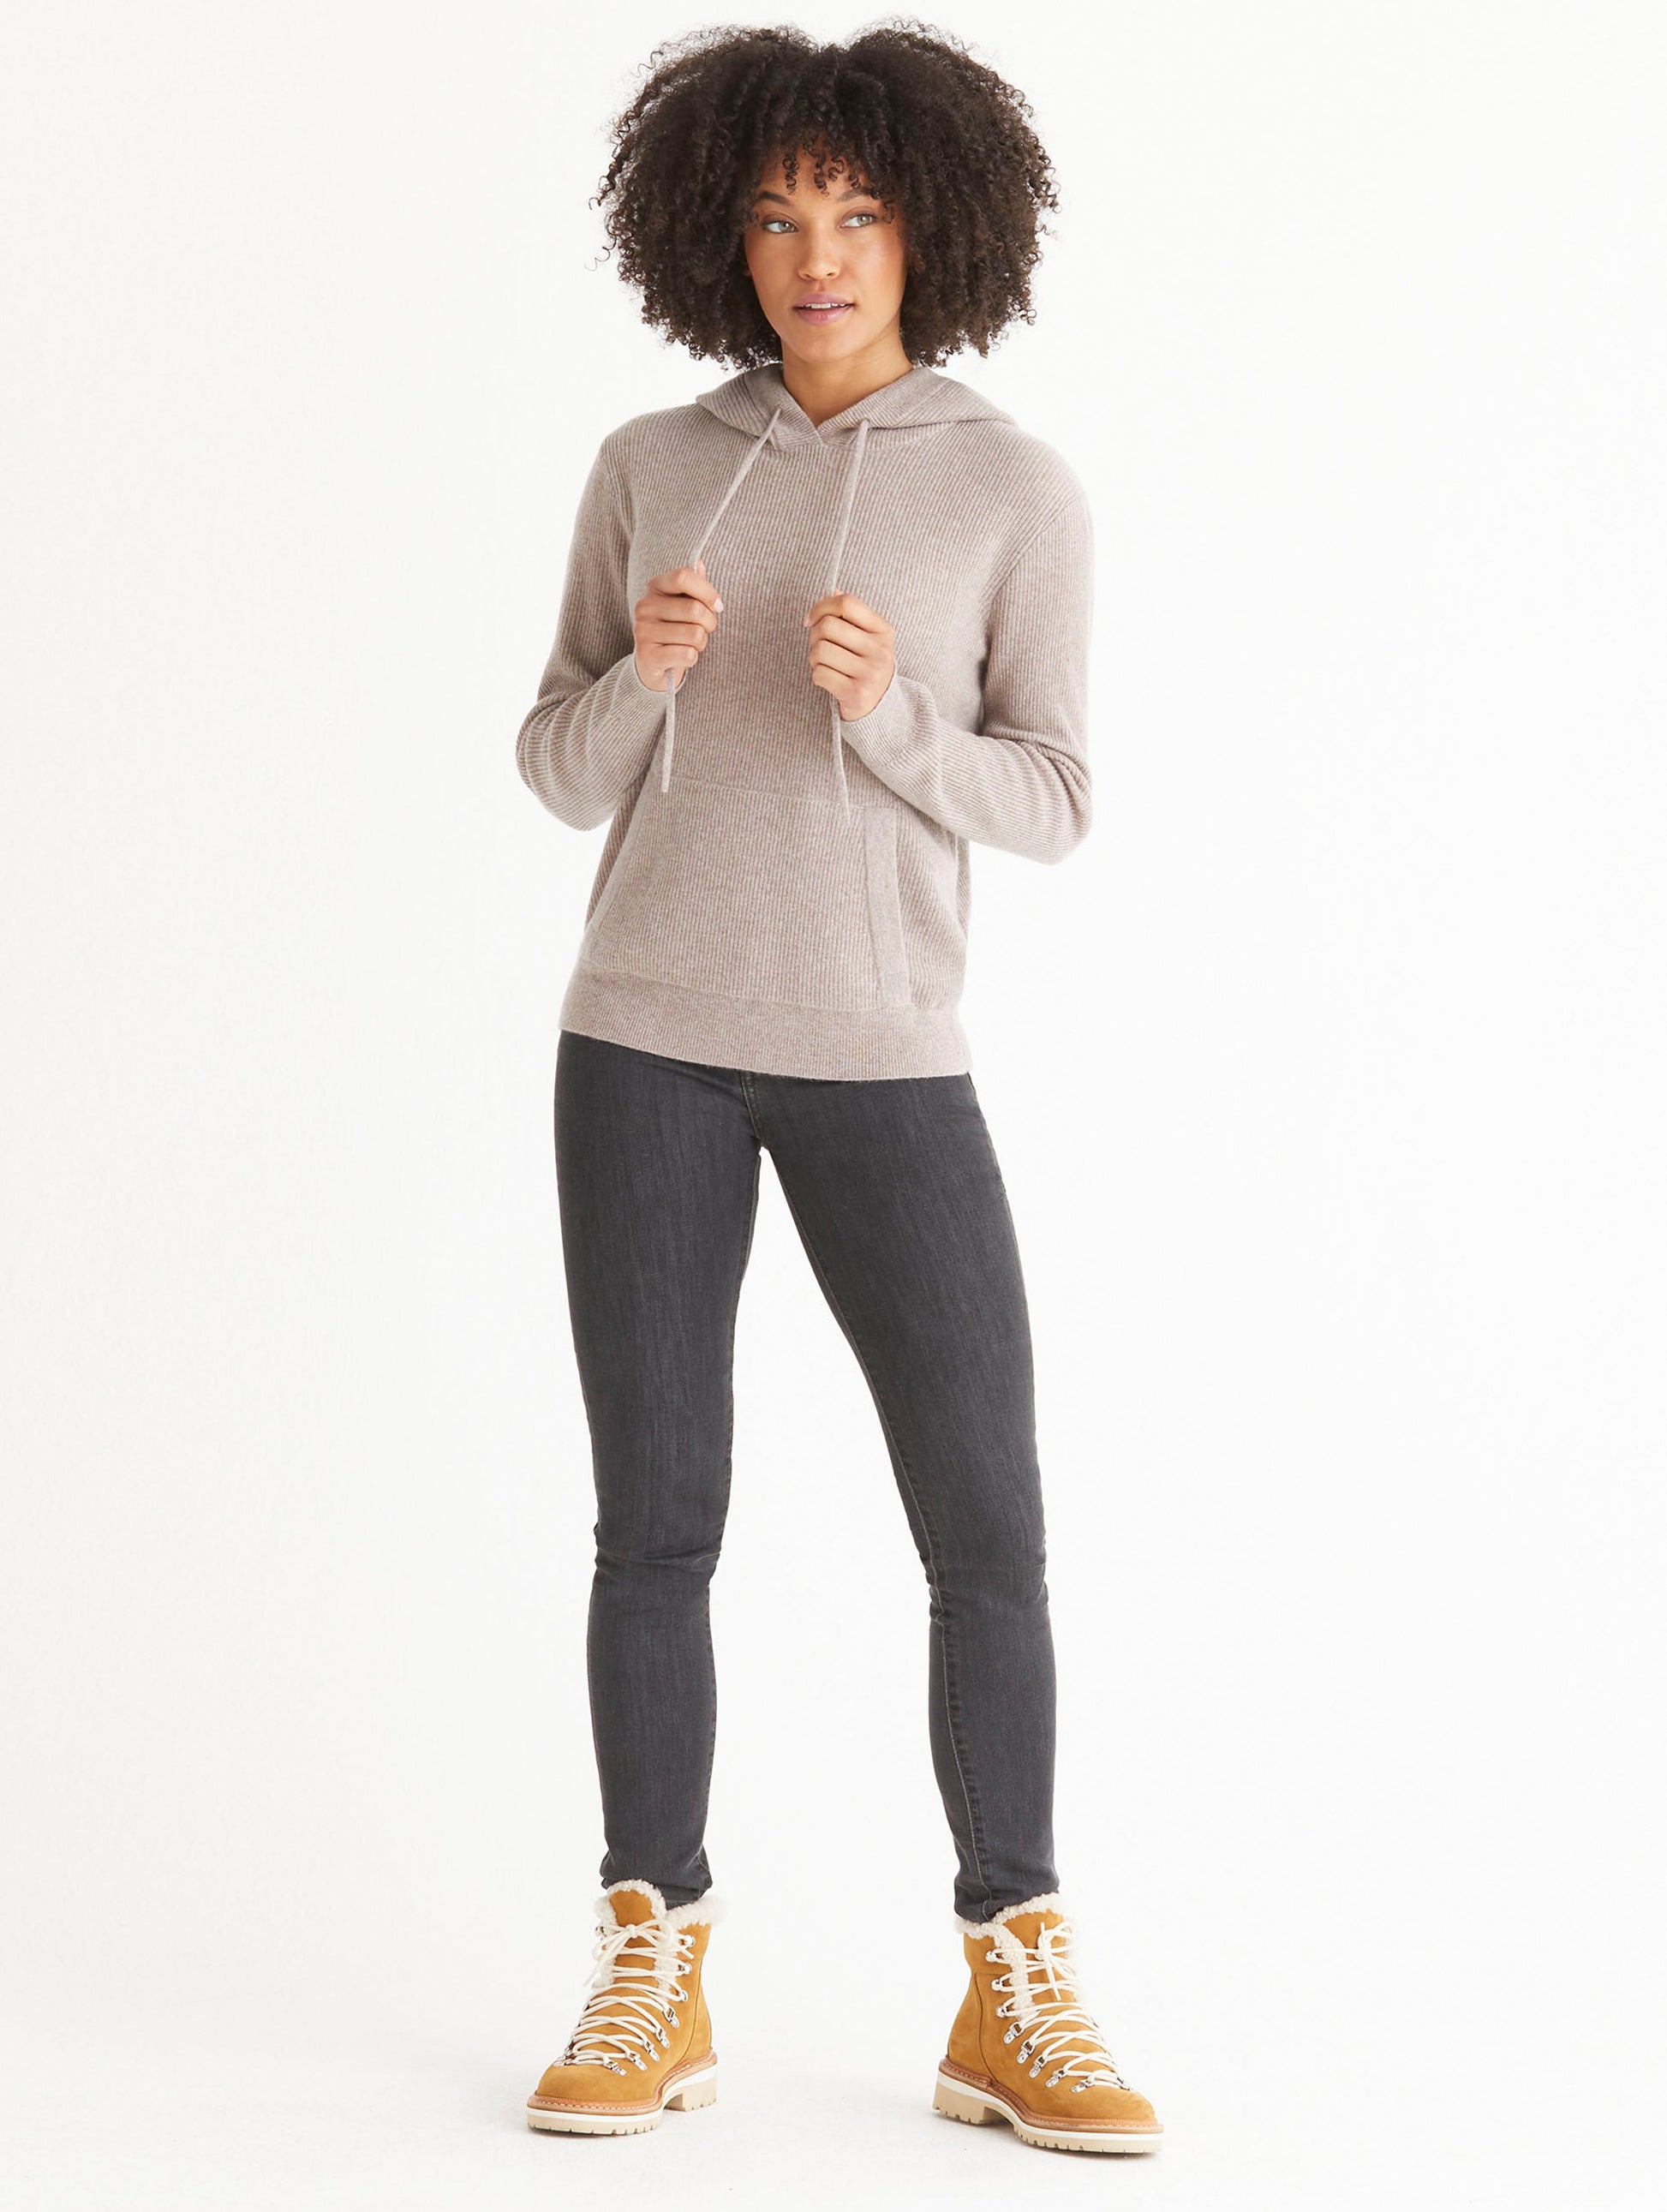 light brown sweater for women from Aether Apparel